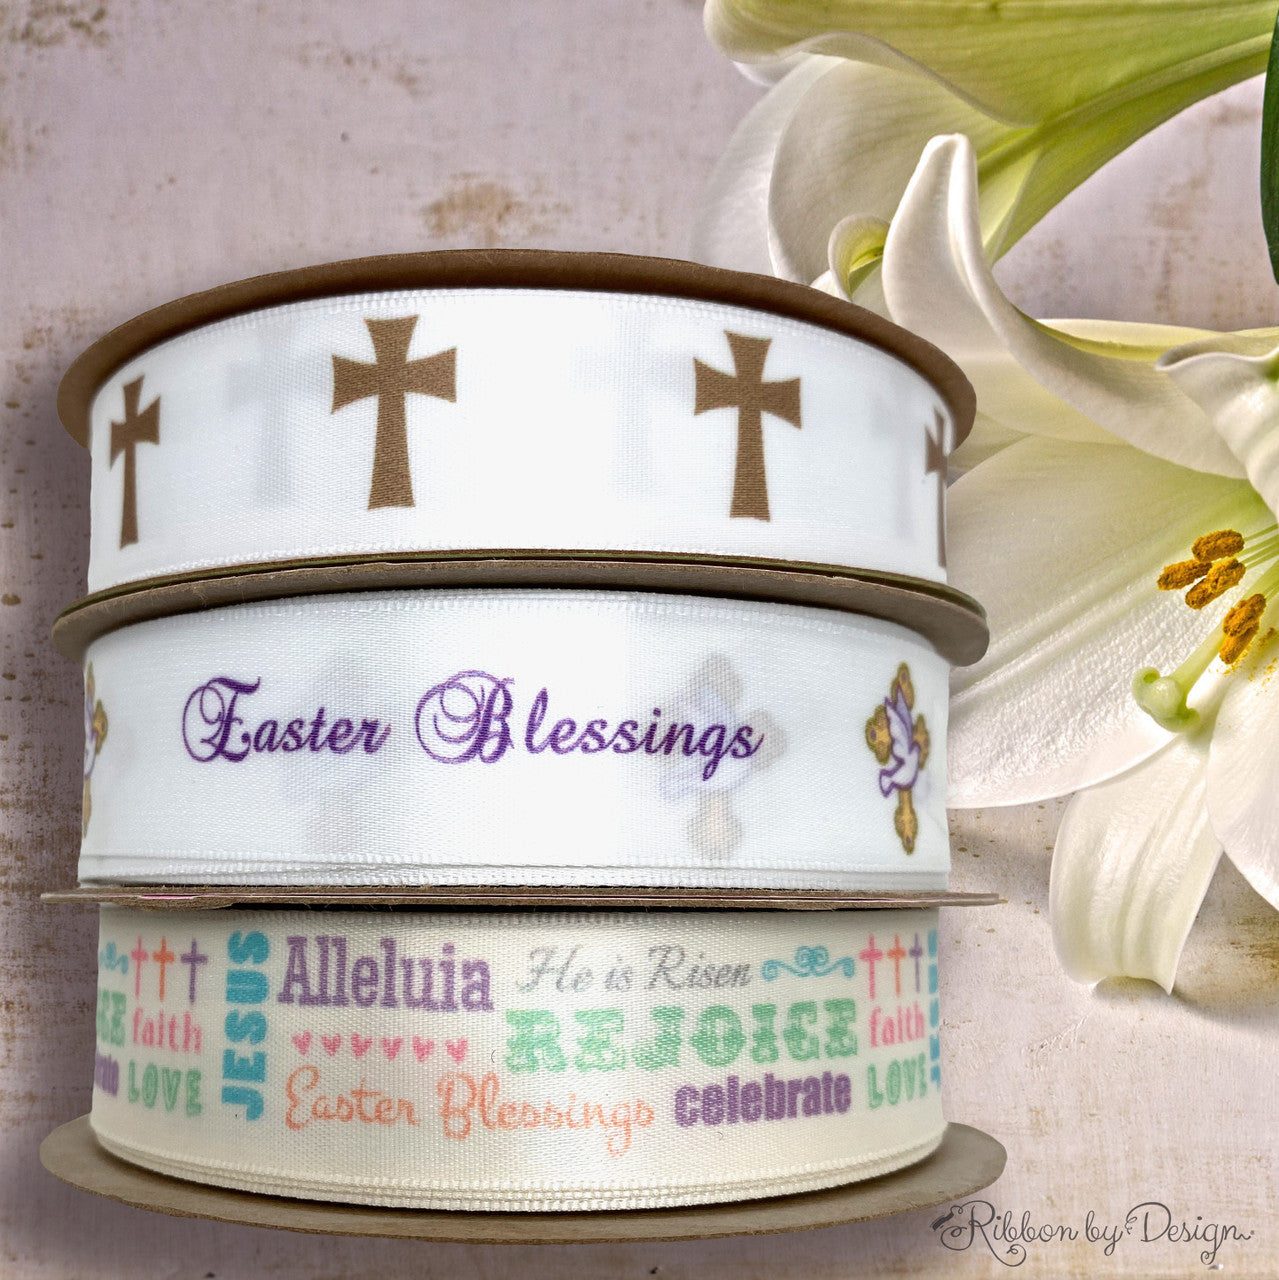 Combining our Christian Easter ribbons for Church and Sunday School celebrations is a great way to decorate for the Easter season!